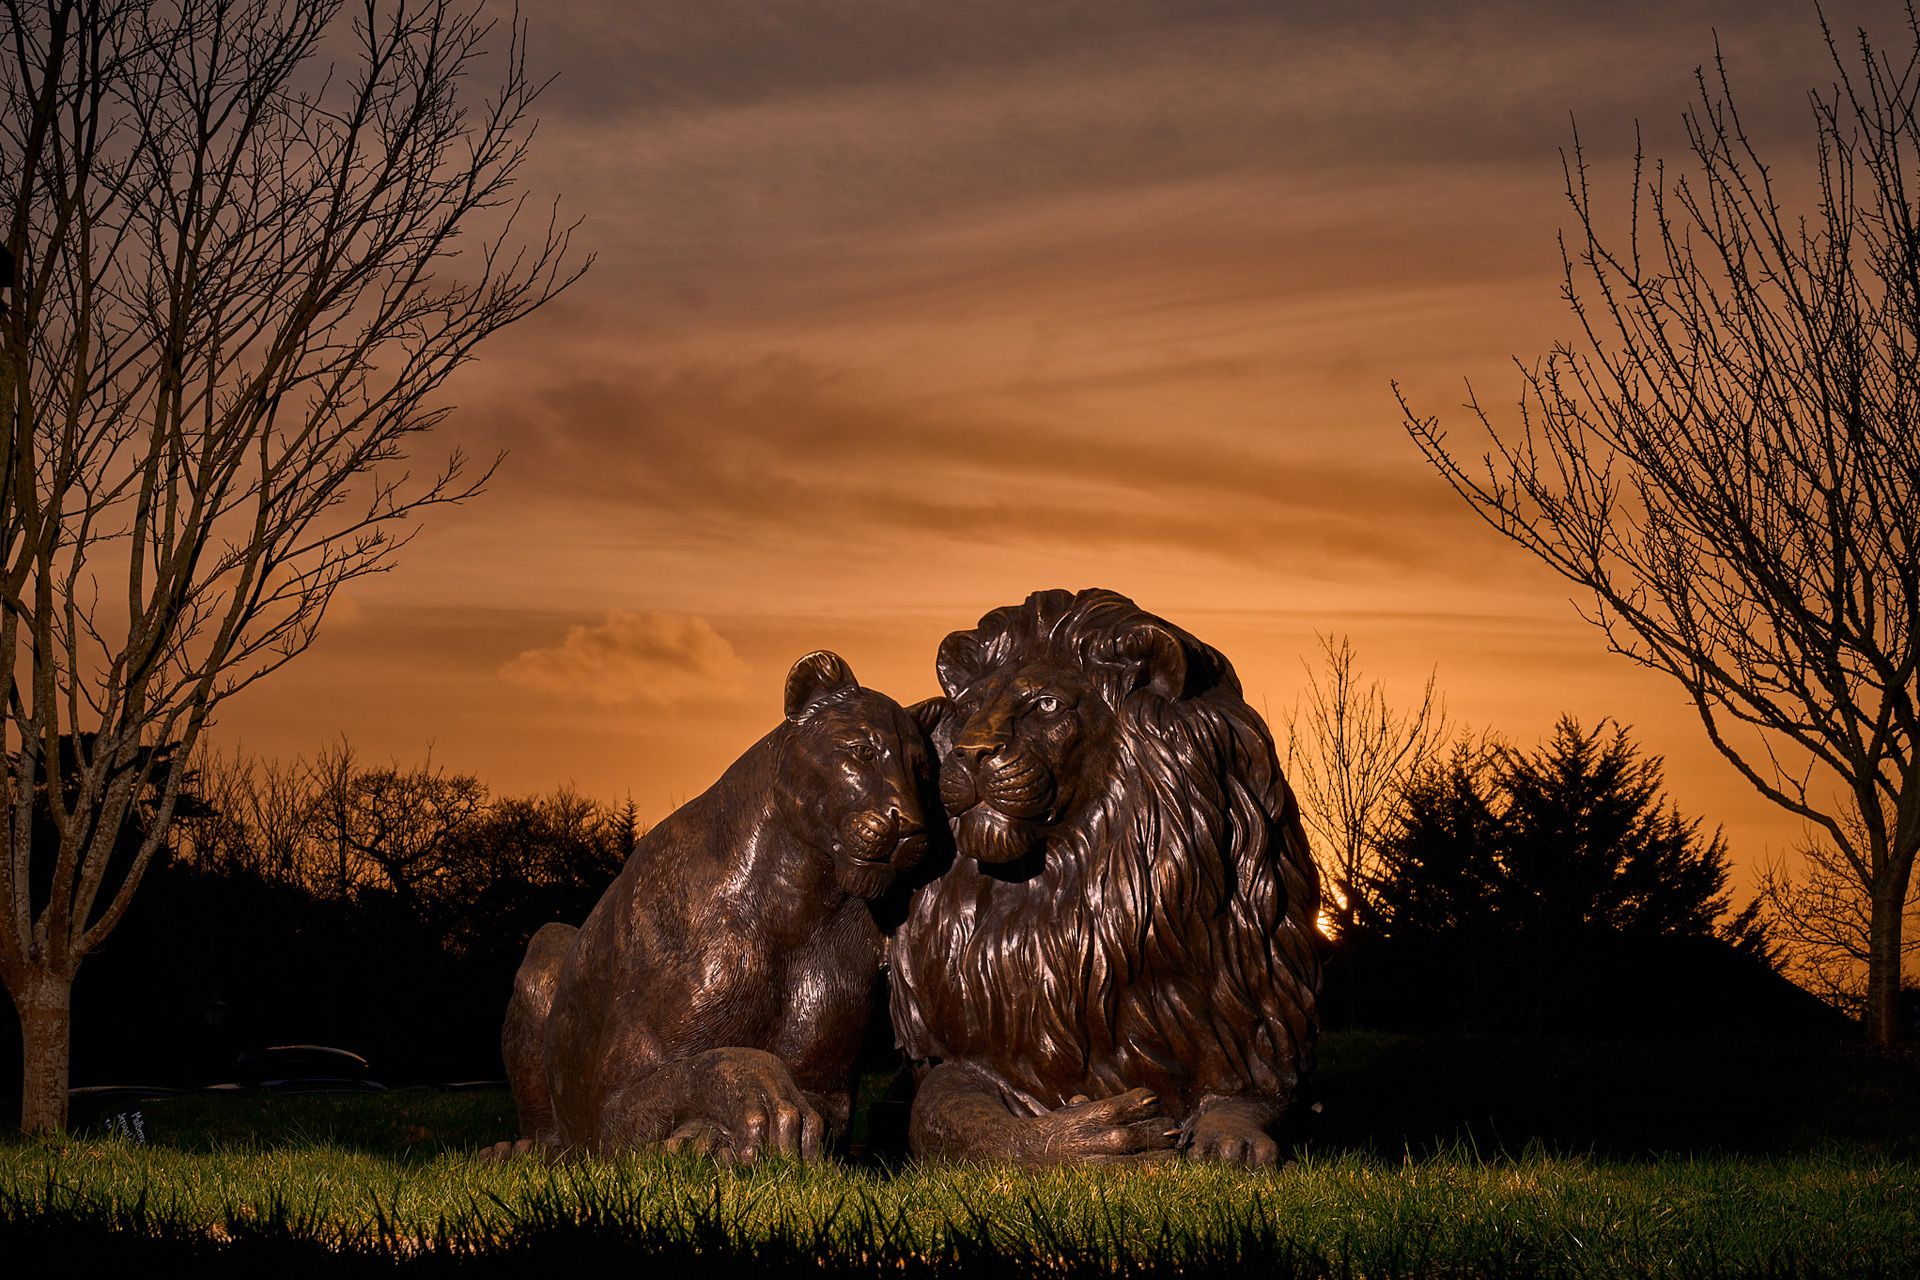 Two lion sculptures of an adult and a cub, with an orange sunset in the background.